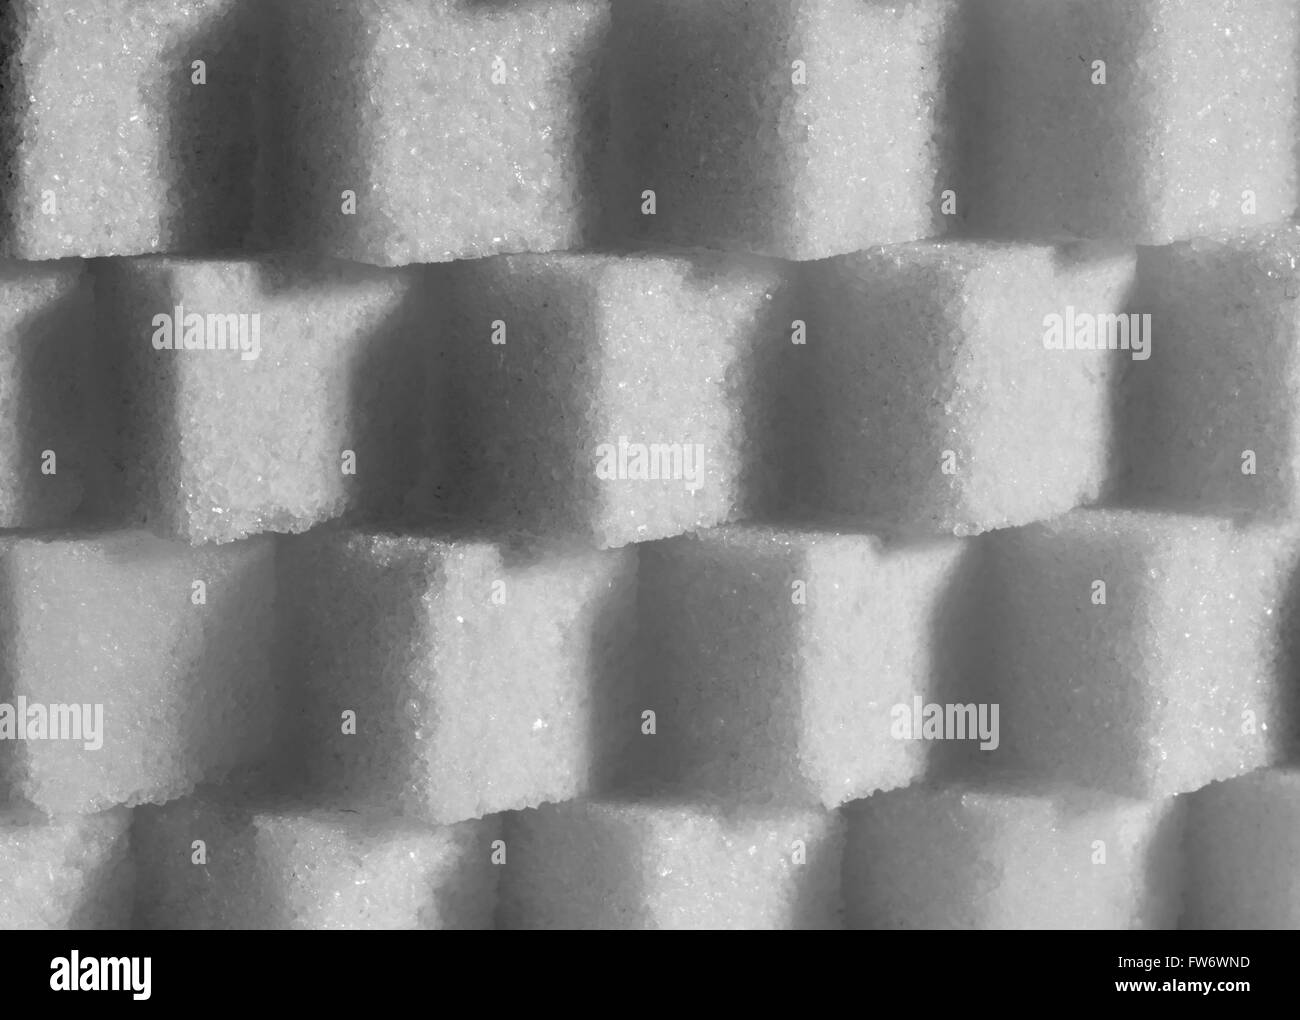 Sugar cubes stacked to form a lattice wall Stock Photo